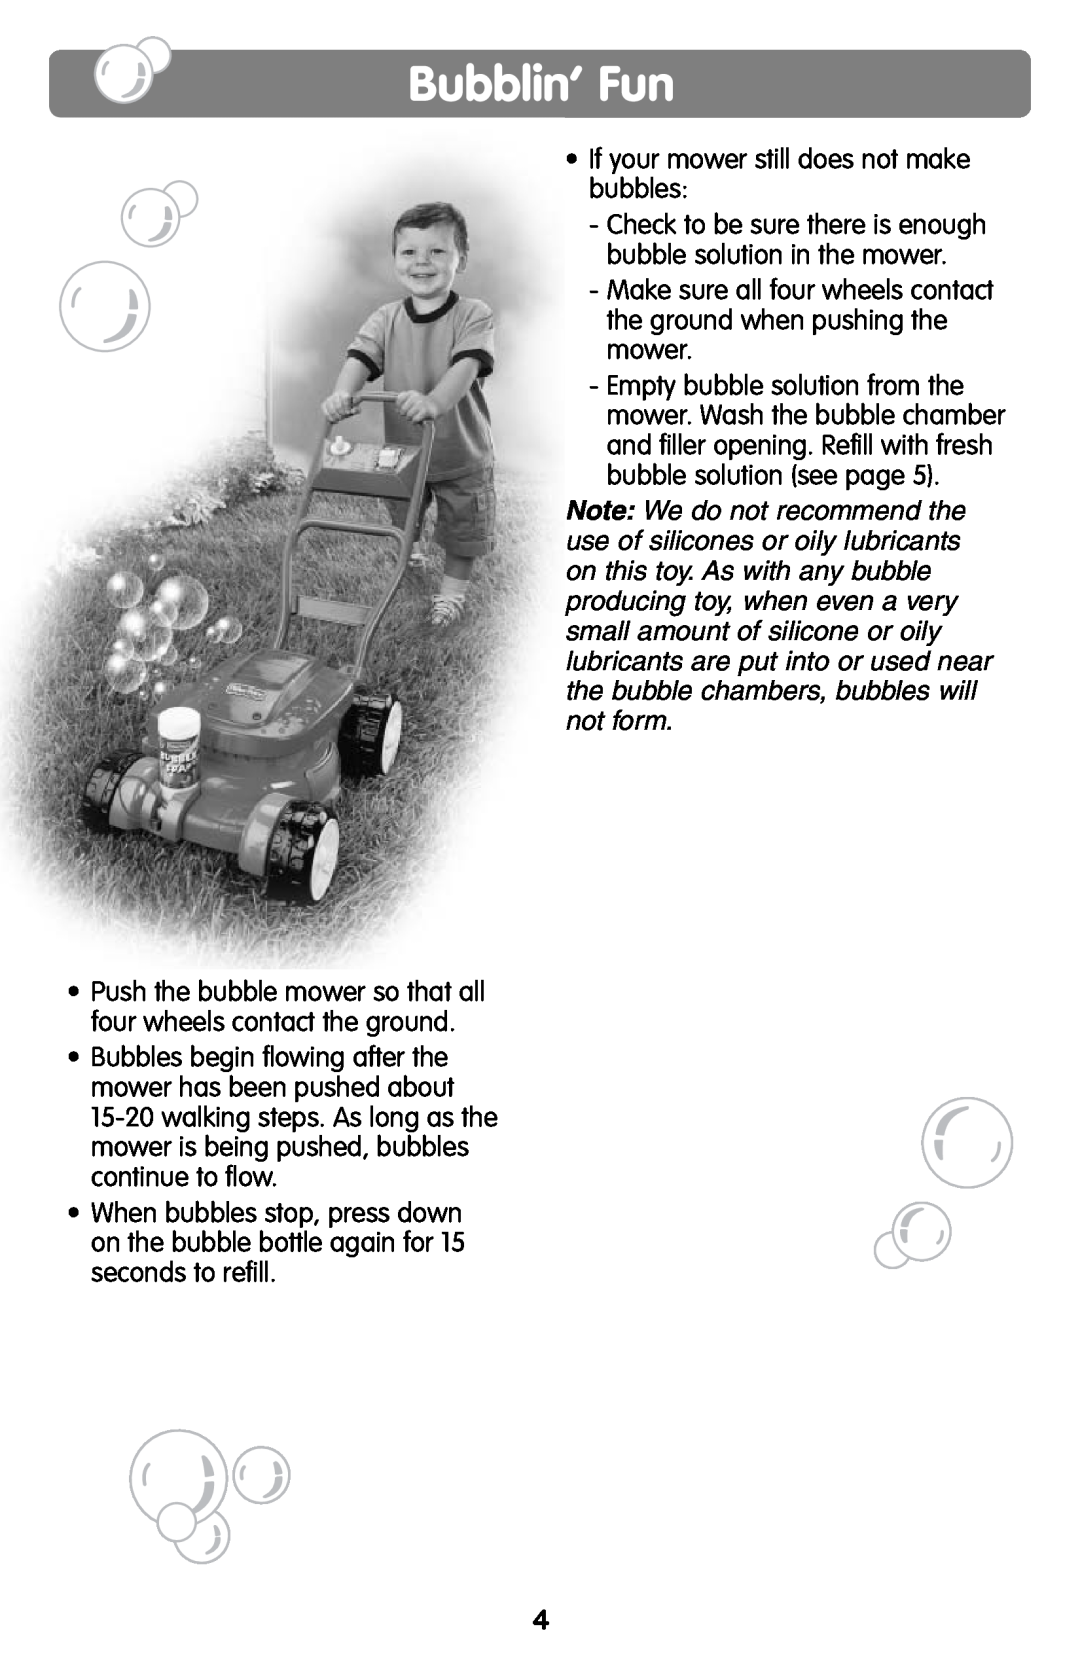 Fisher-Price H8910 instruction sheet Bubblin’ Fun, If your mower still does not make bubbles 